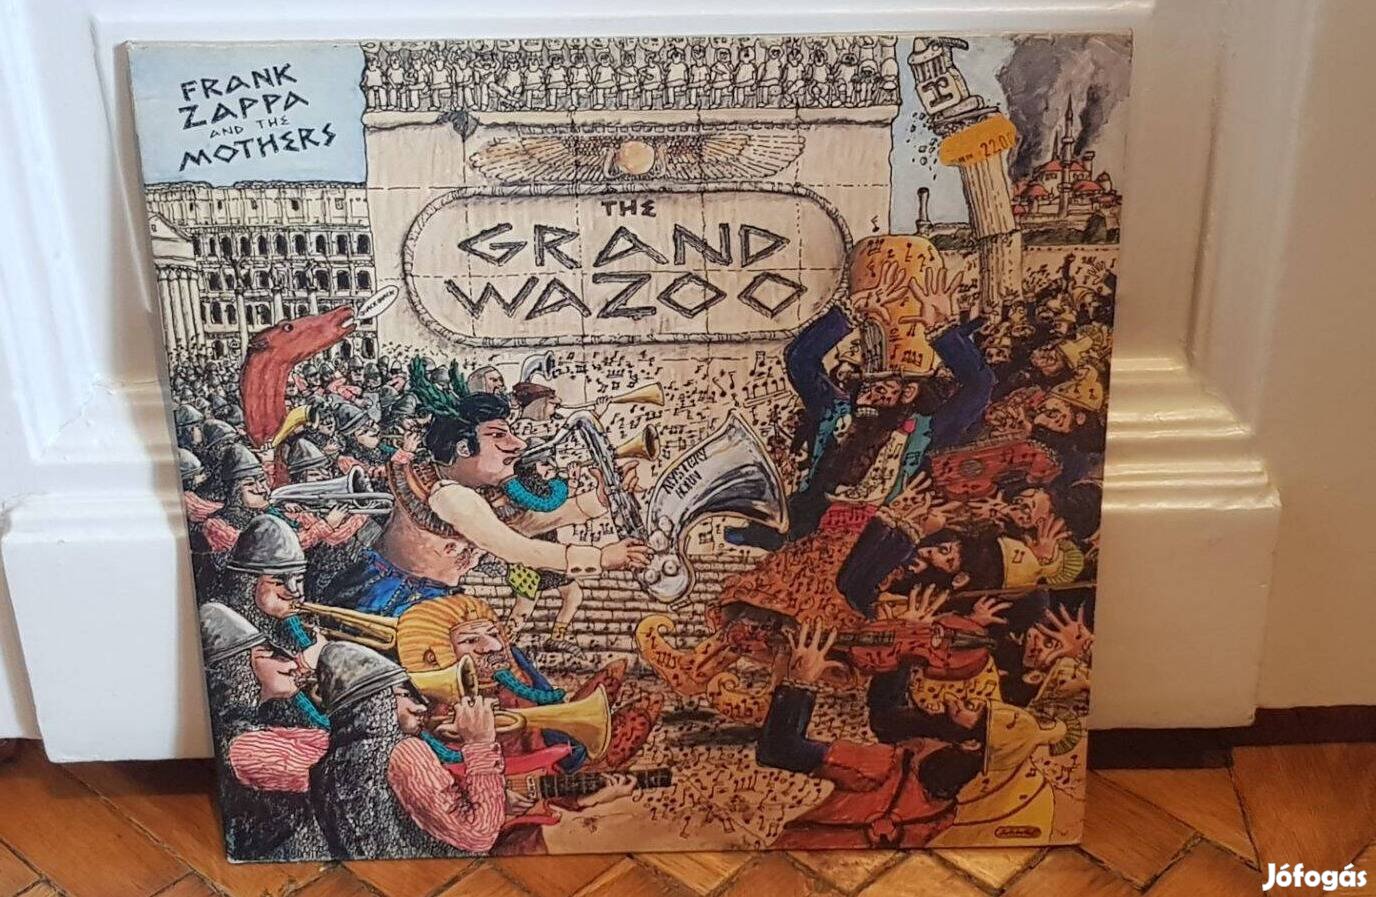 Frank Zappa And The Mothers - The Grand Wazoo LP Germany